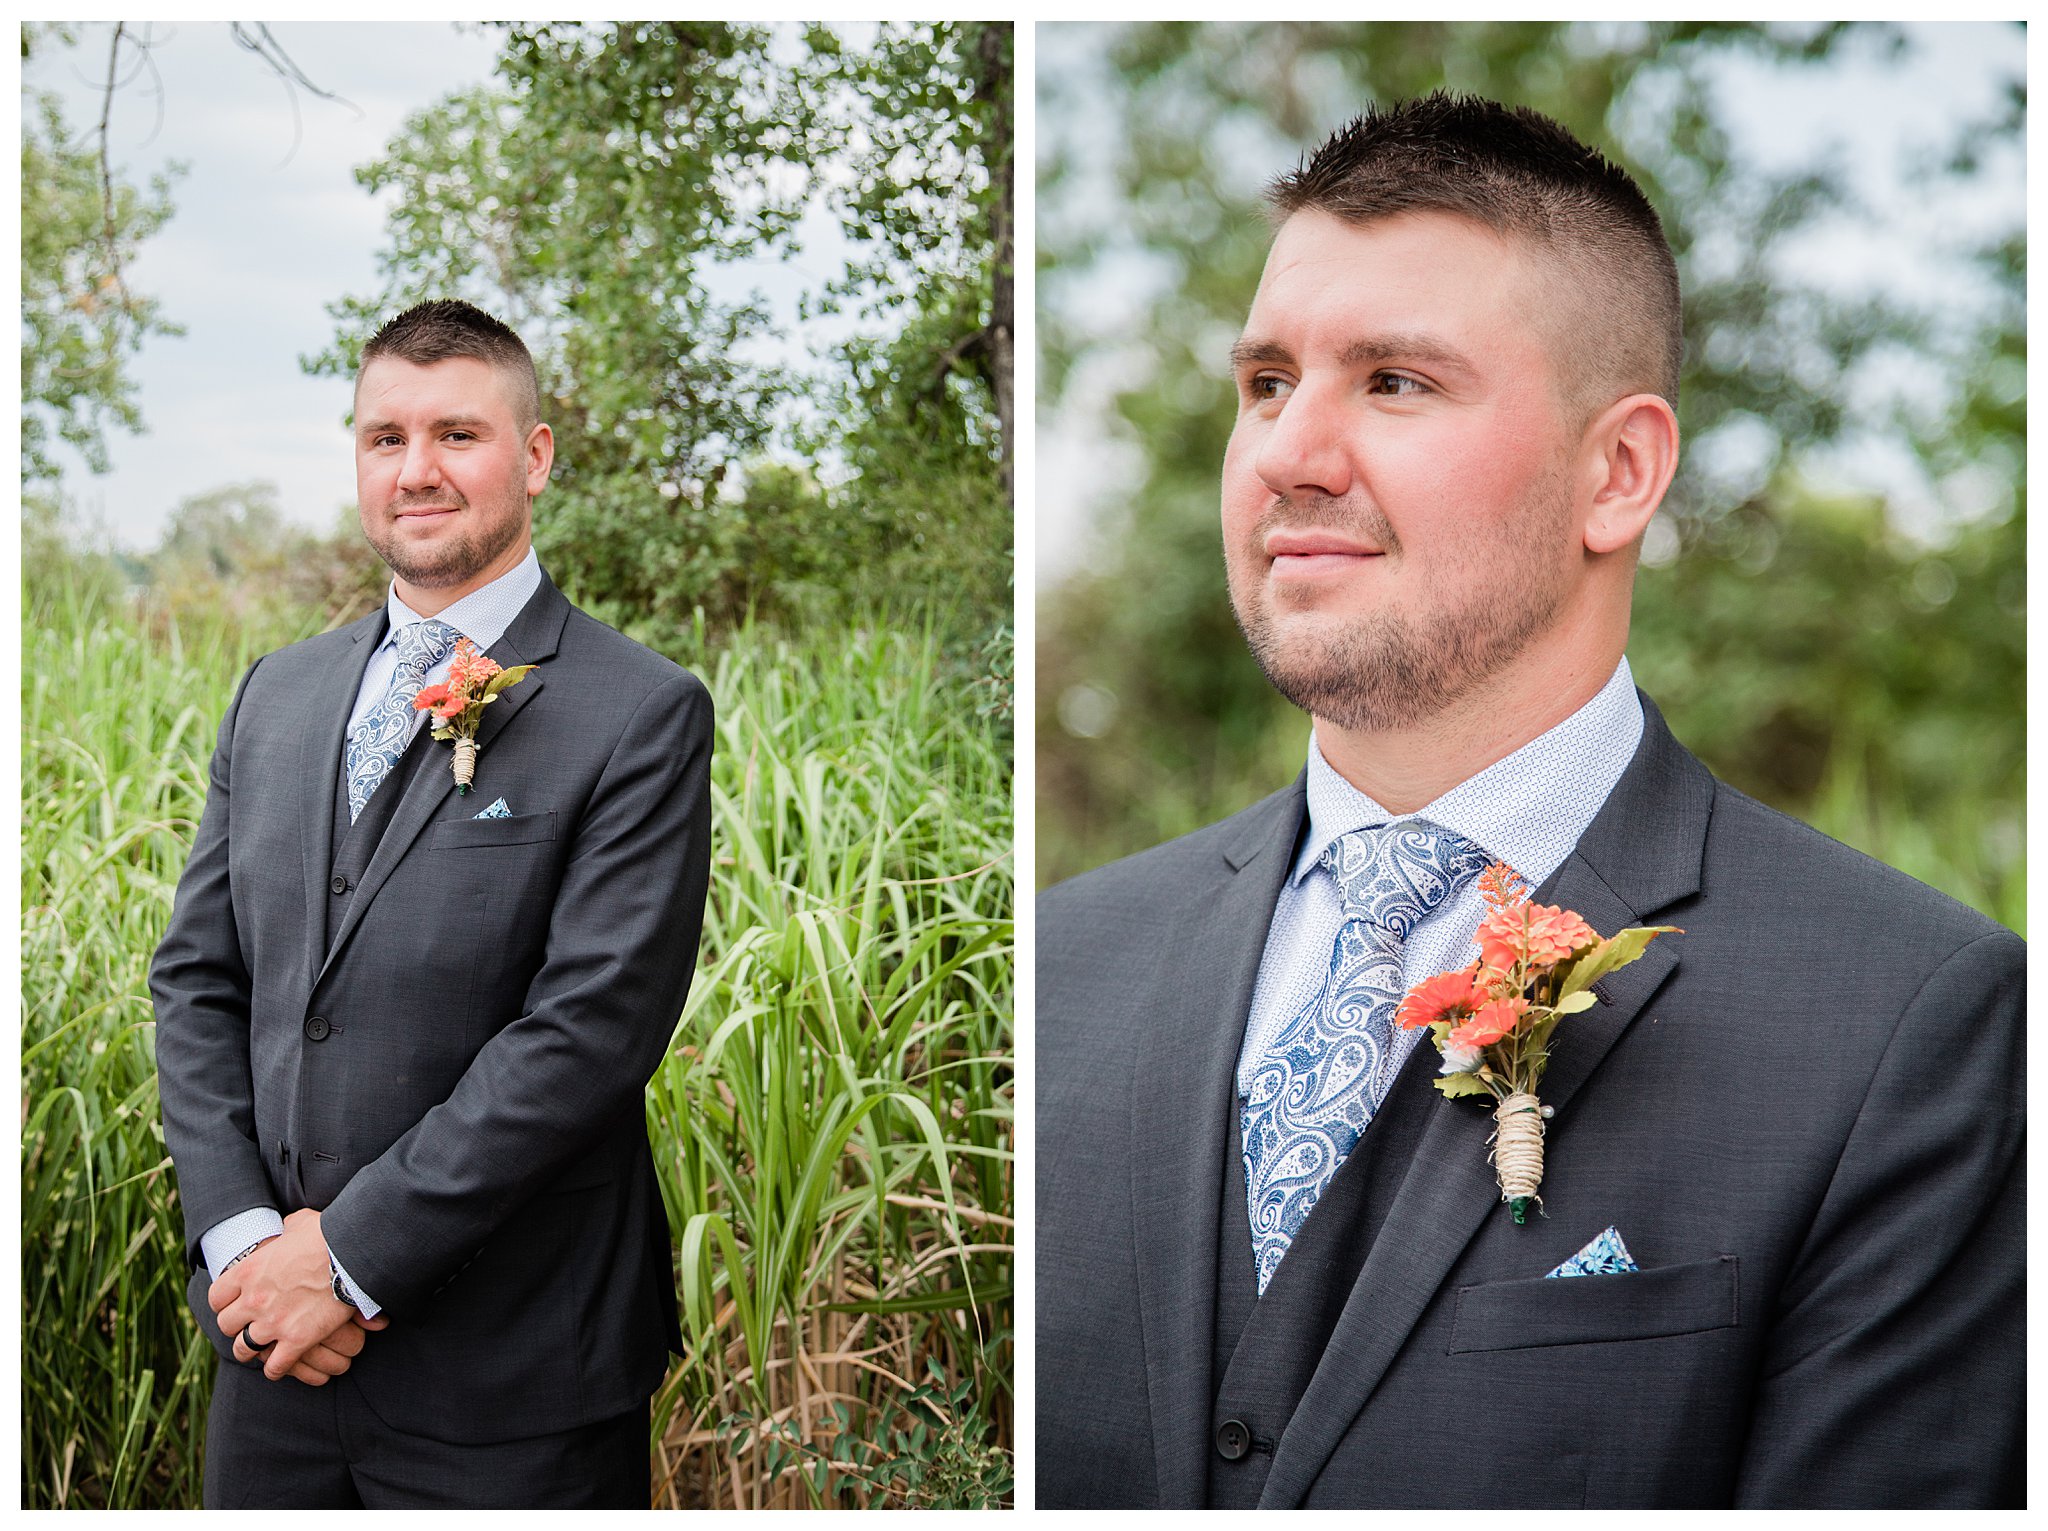 The groom poses for bridal portraits